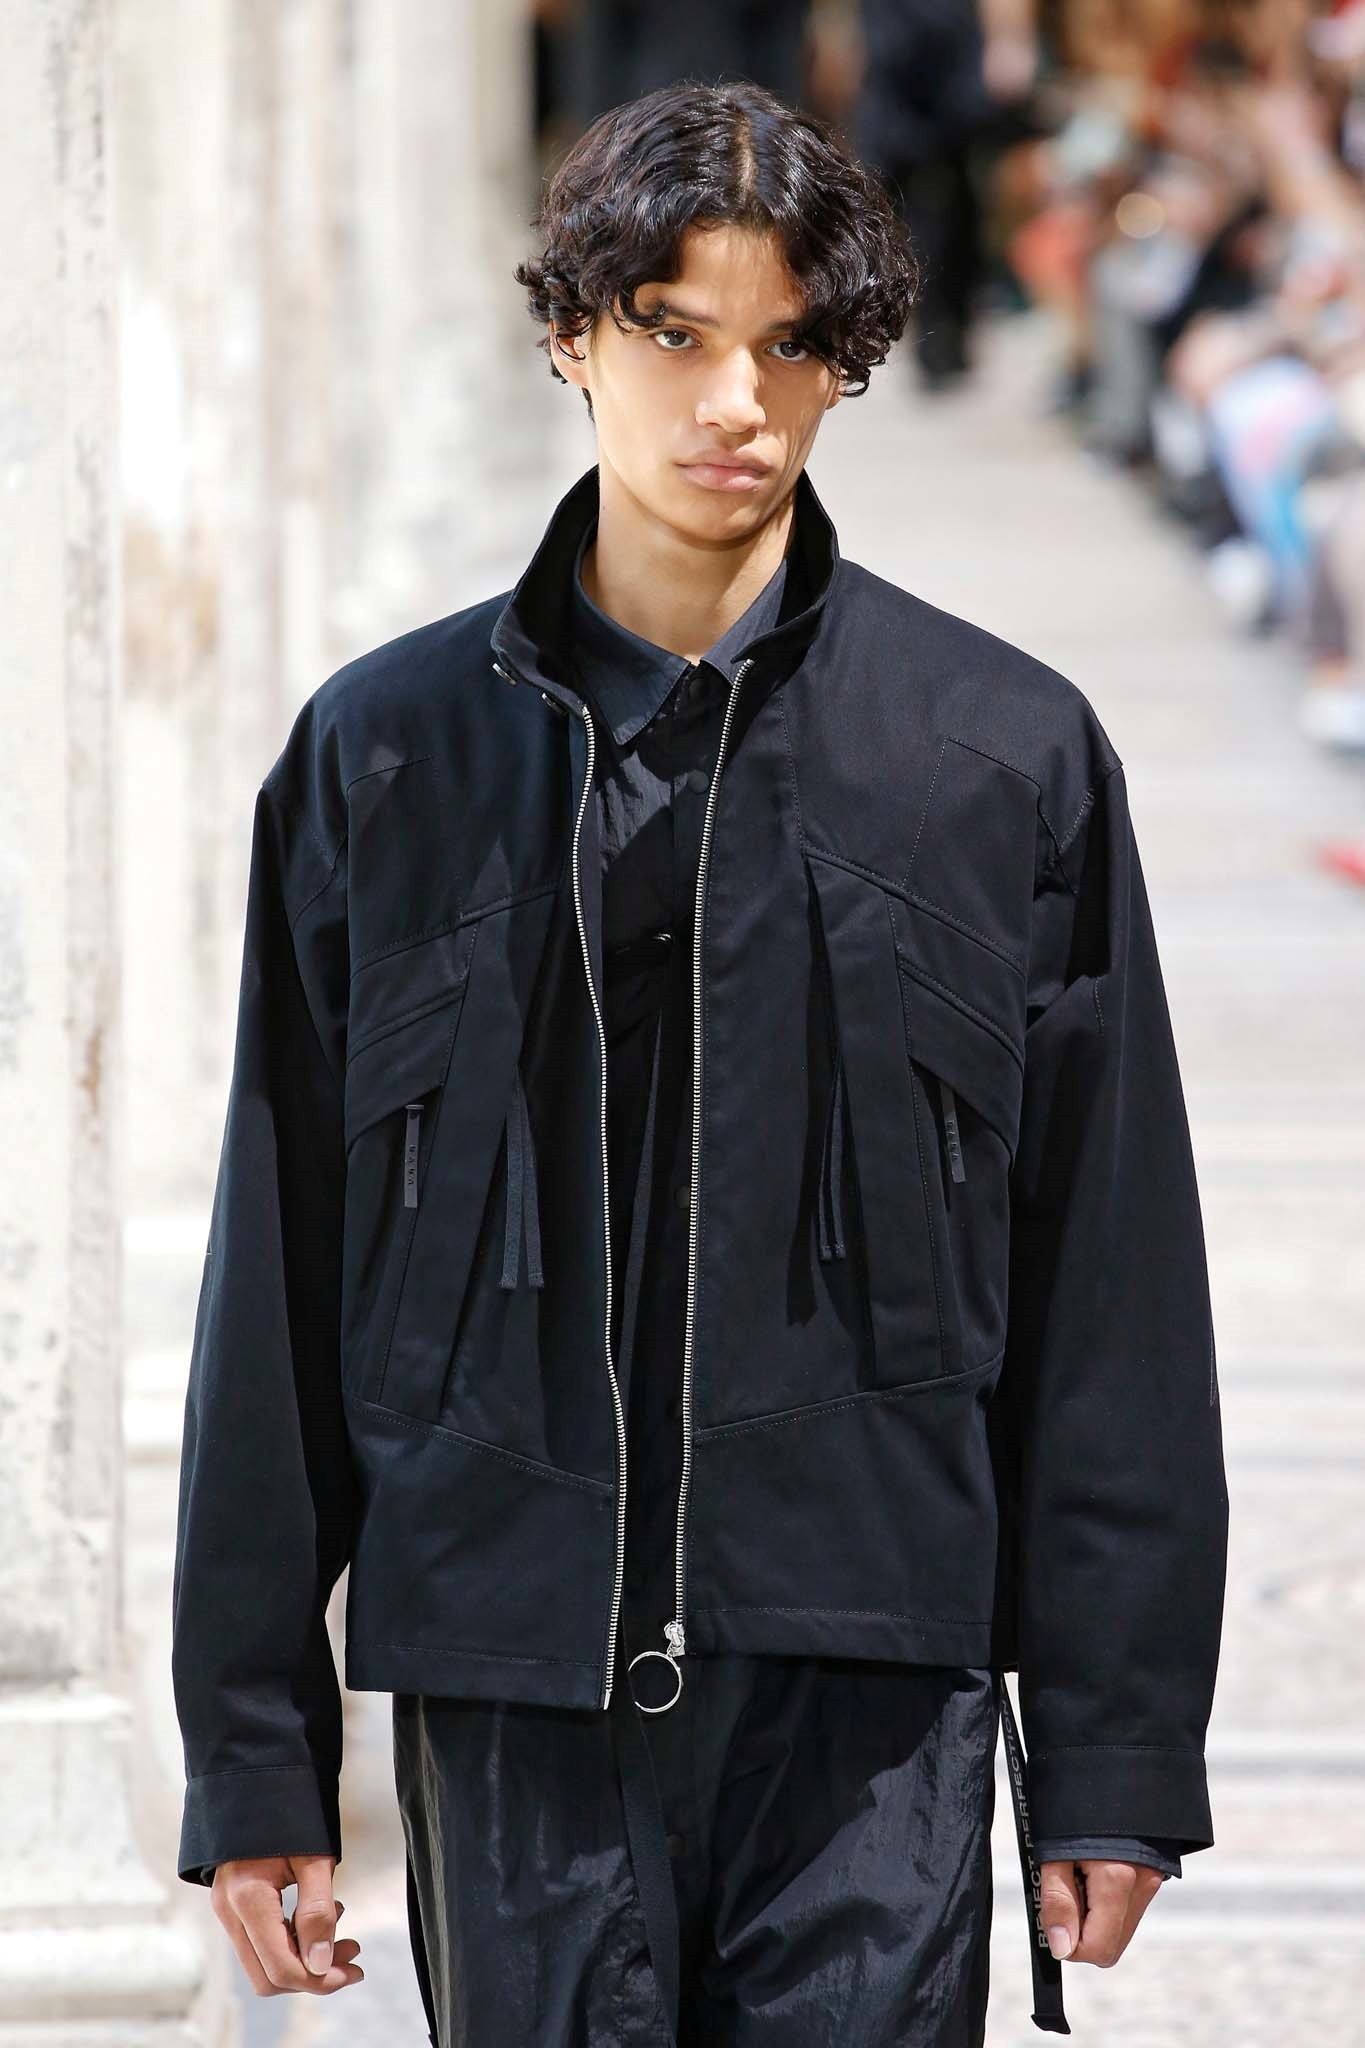 Male model with curly hair wearing a Đen jacket on the runway 